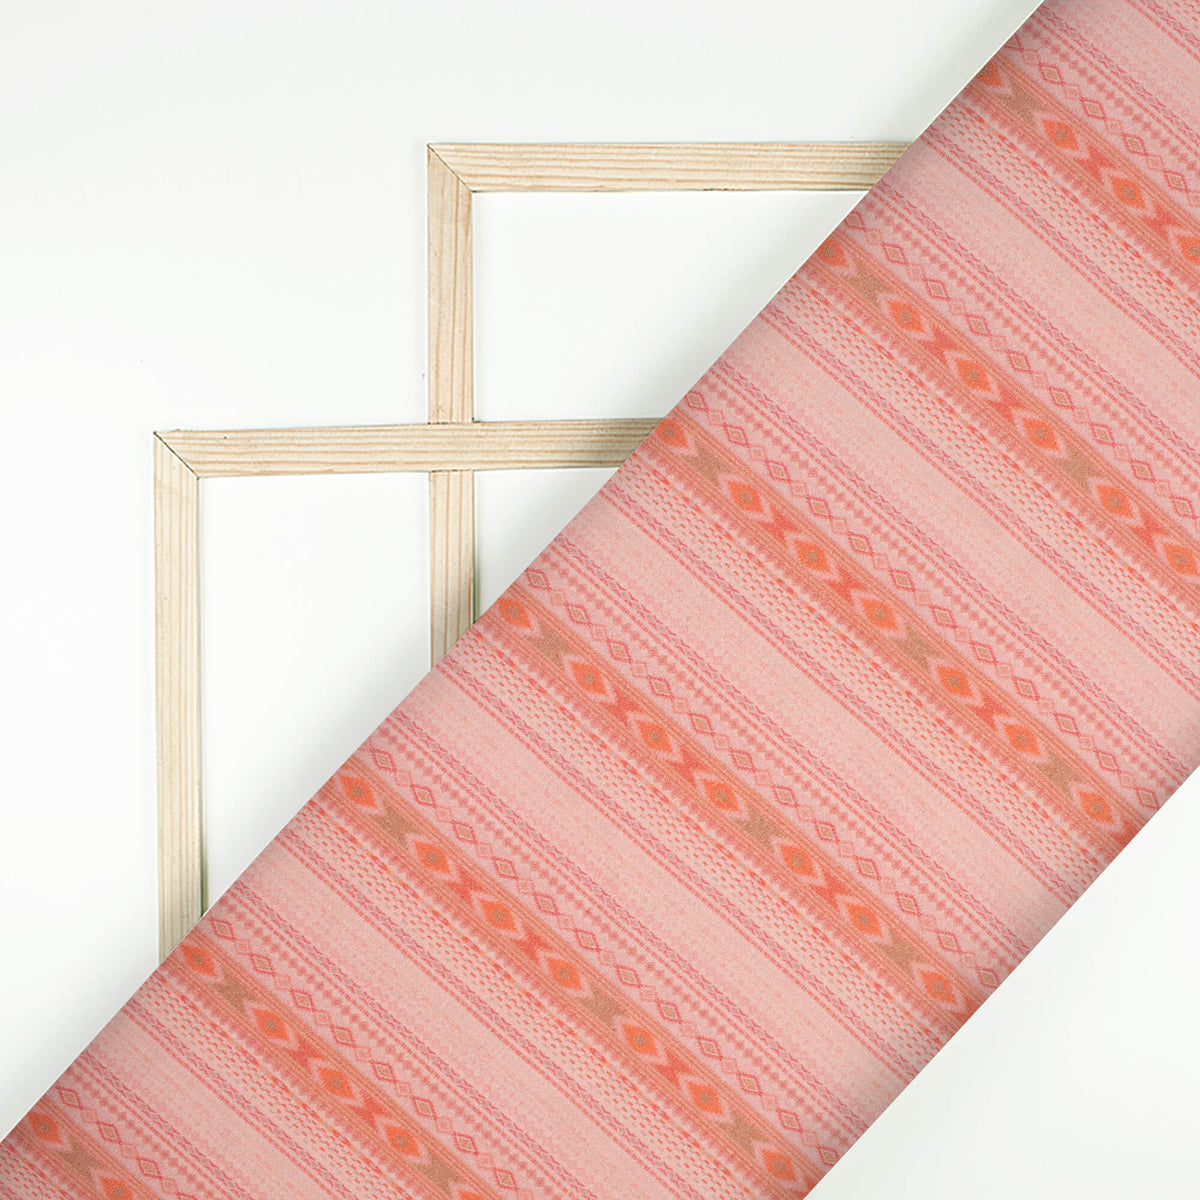 Peach And Coral Orange Stripes Pattern Digital Print Viscose Rayon Fabric (Width 58 Inches)